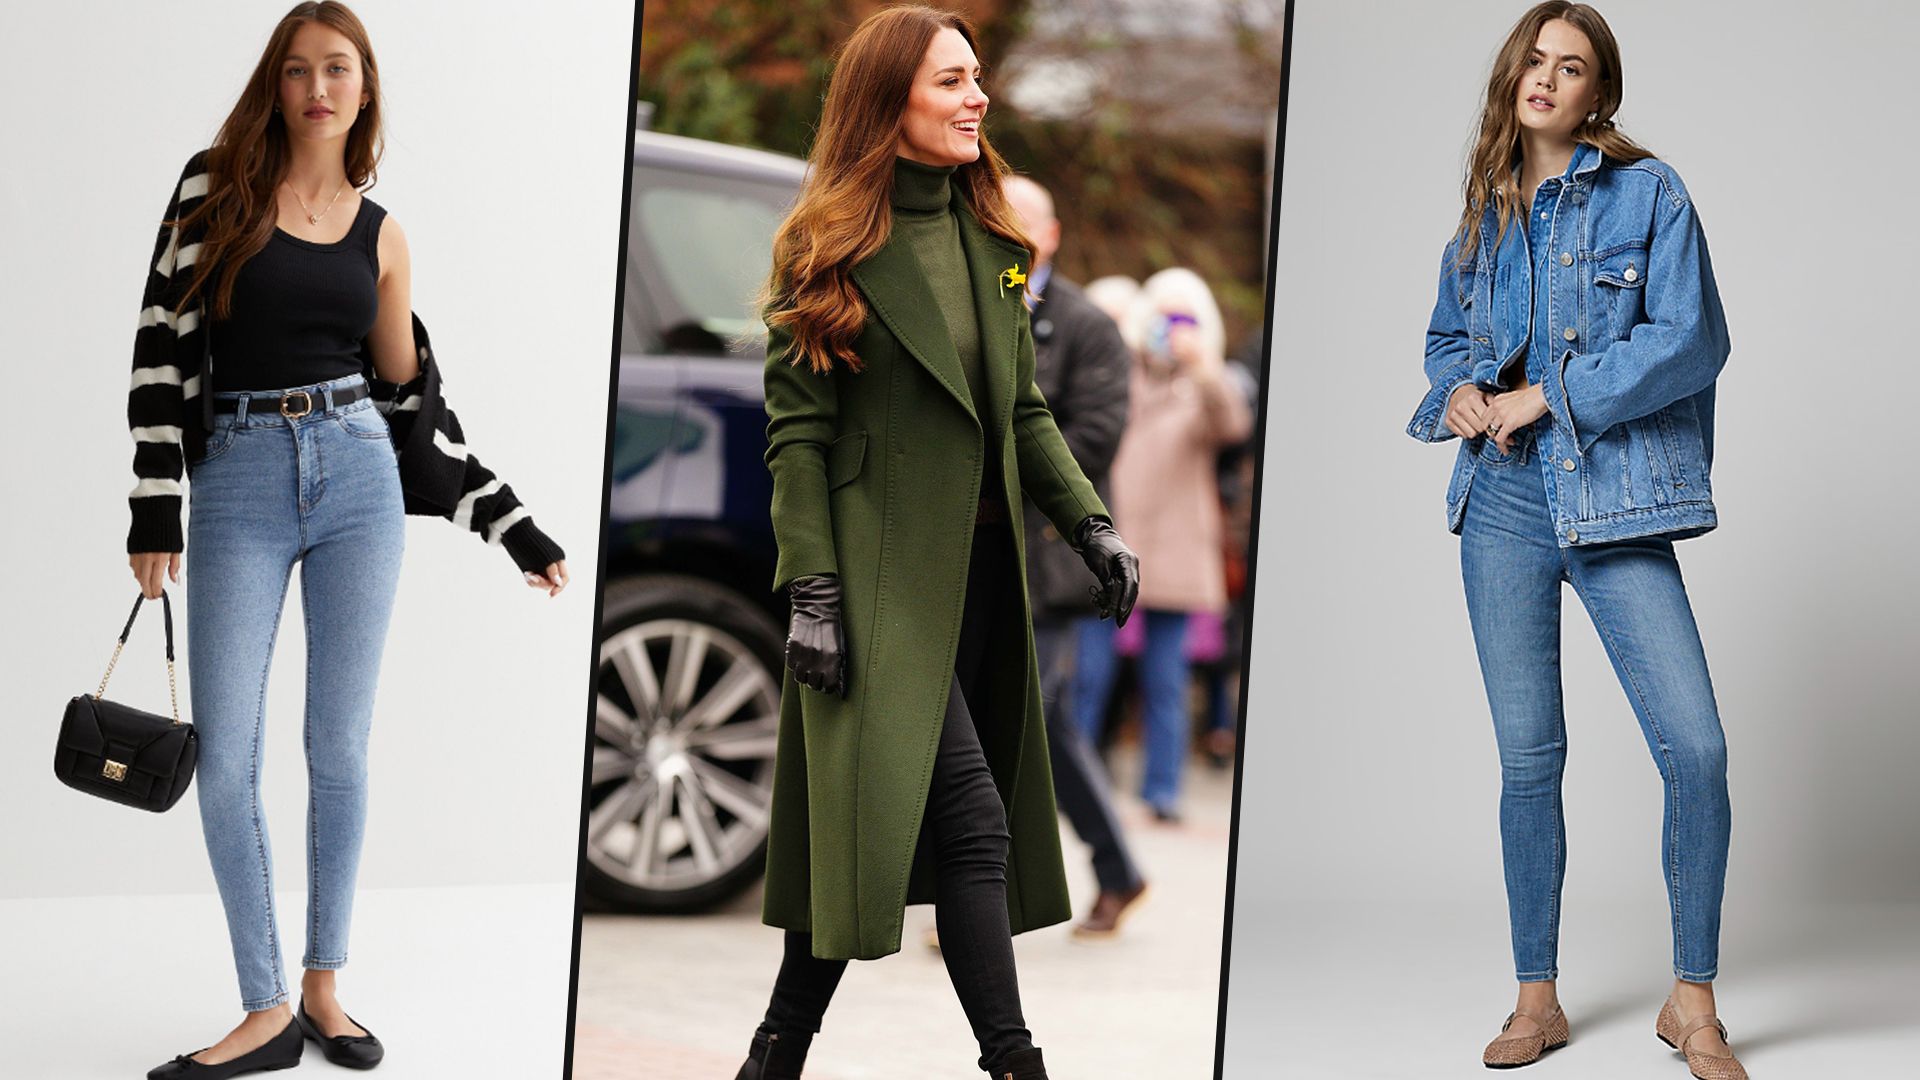 Skinny jeans are back in style & Princess Kate's a fan - 6 best slim fit jeans to shop